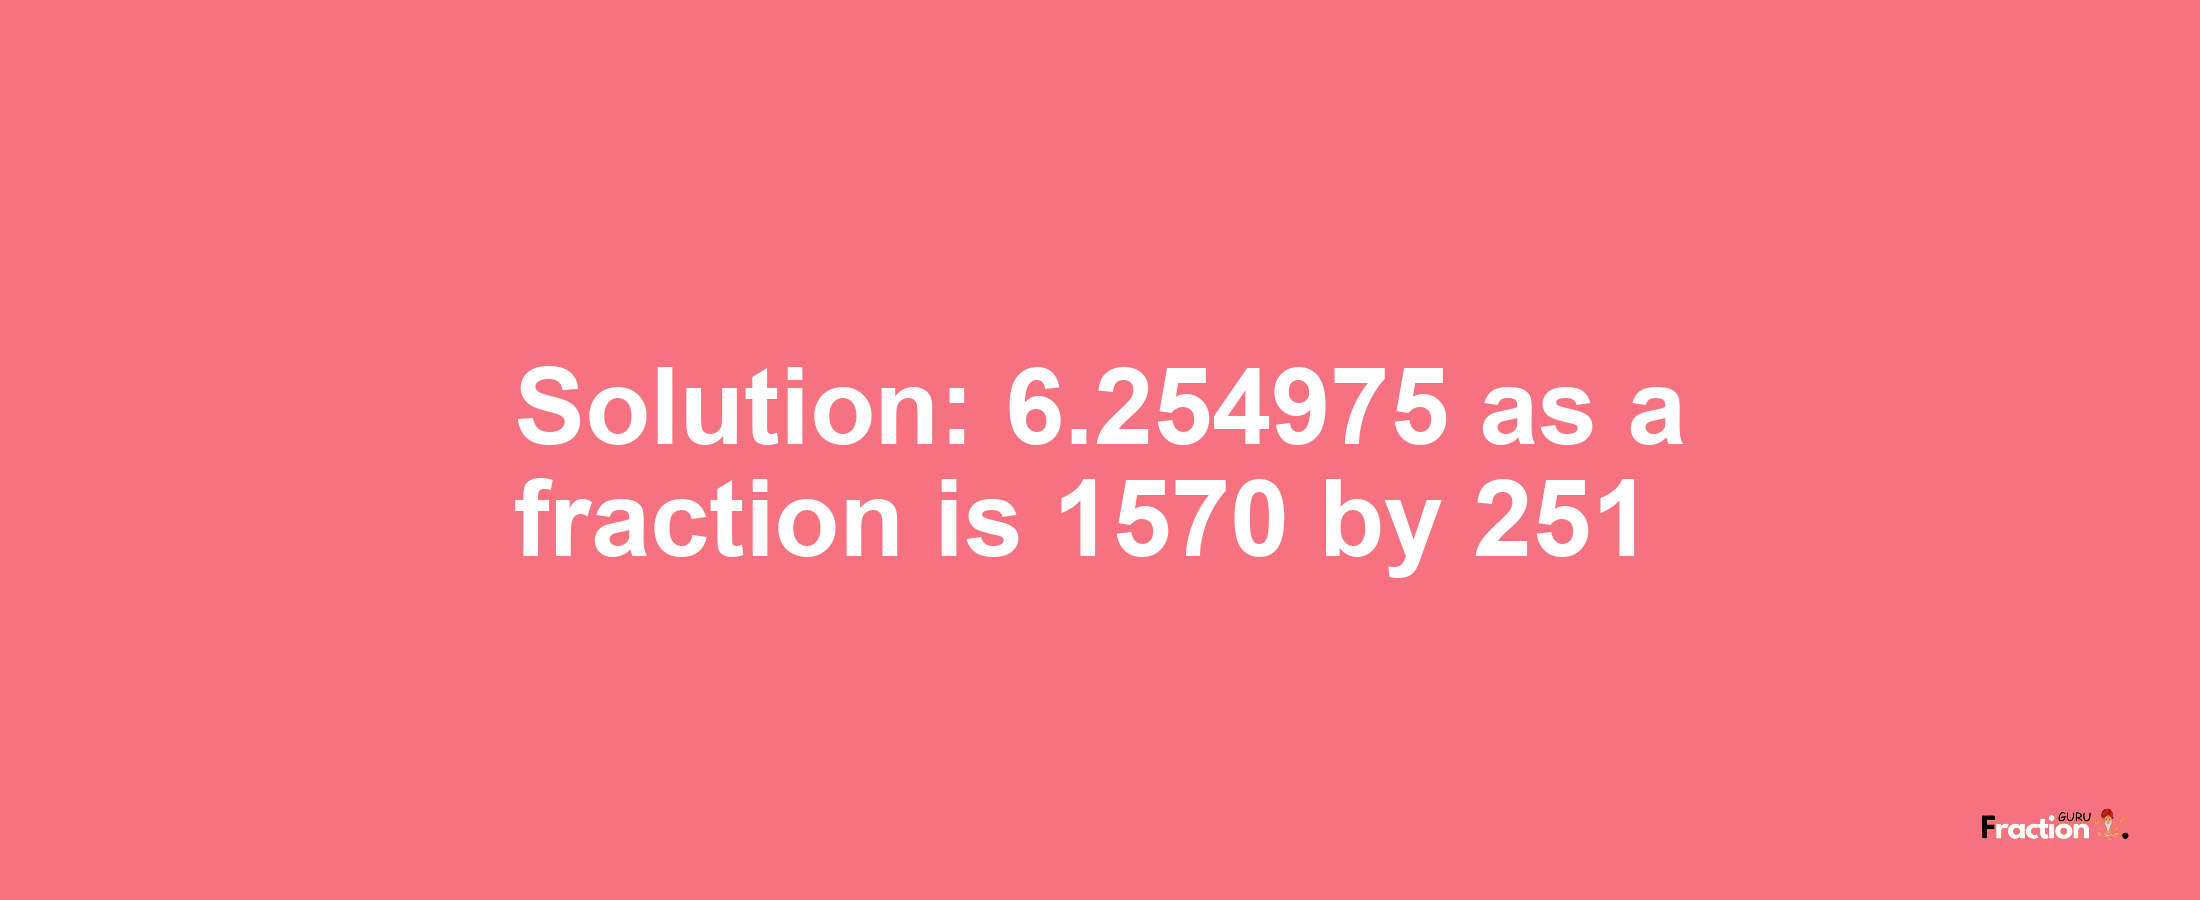 Solution:6.254975 as a fraction is 1570/251